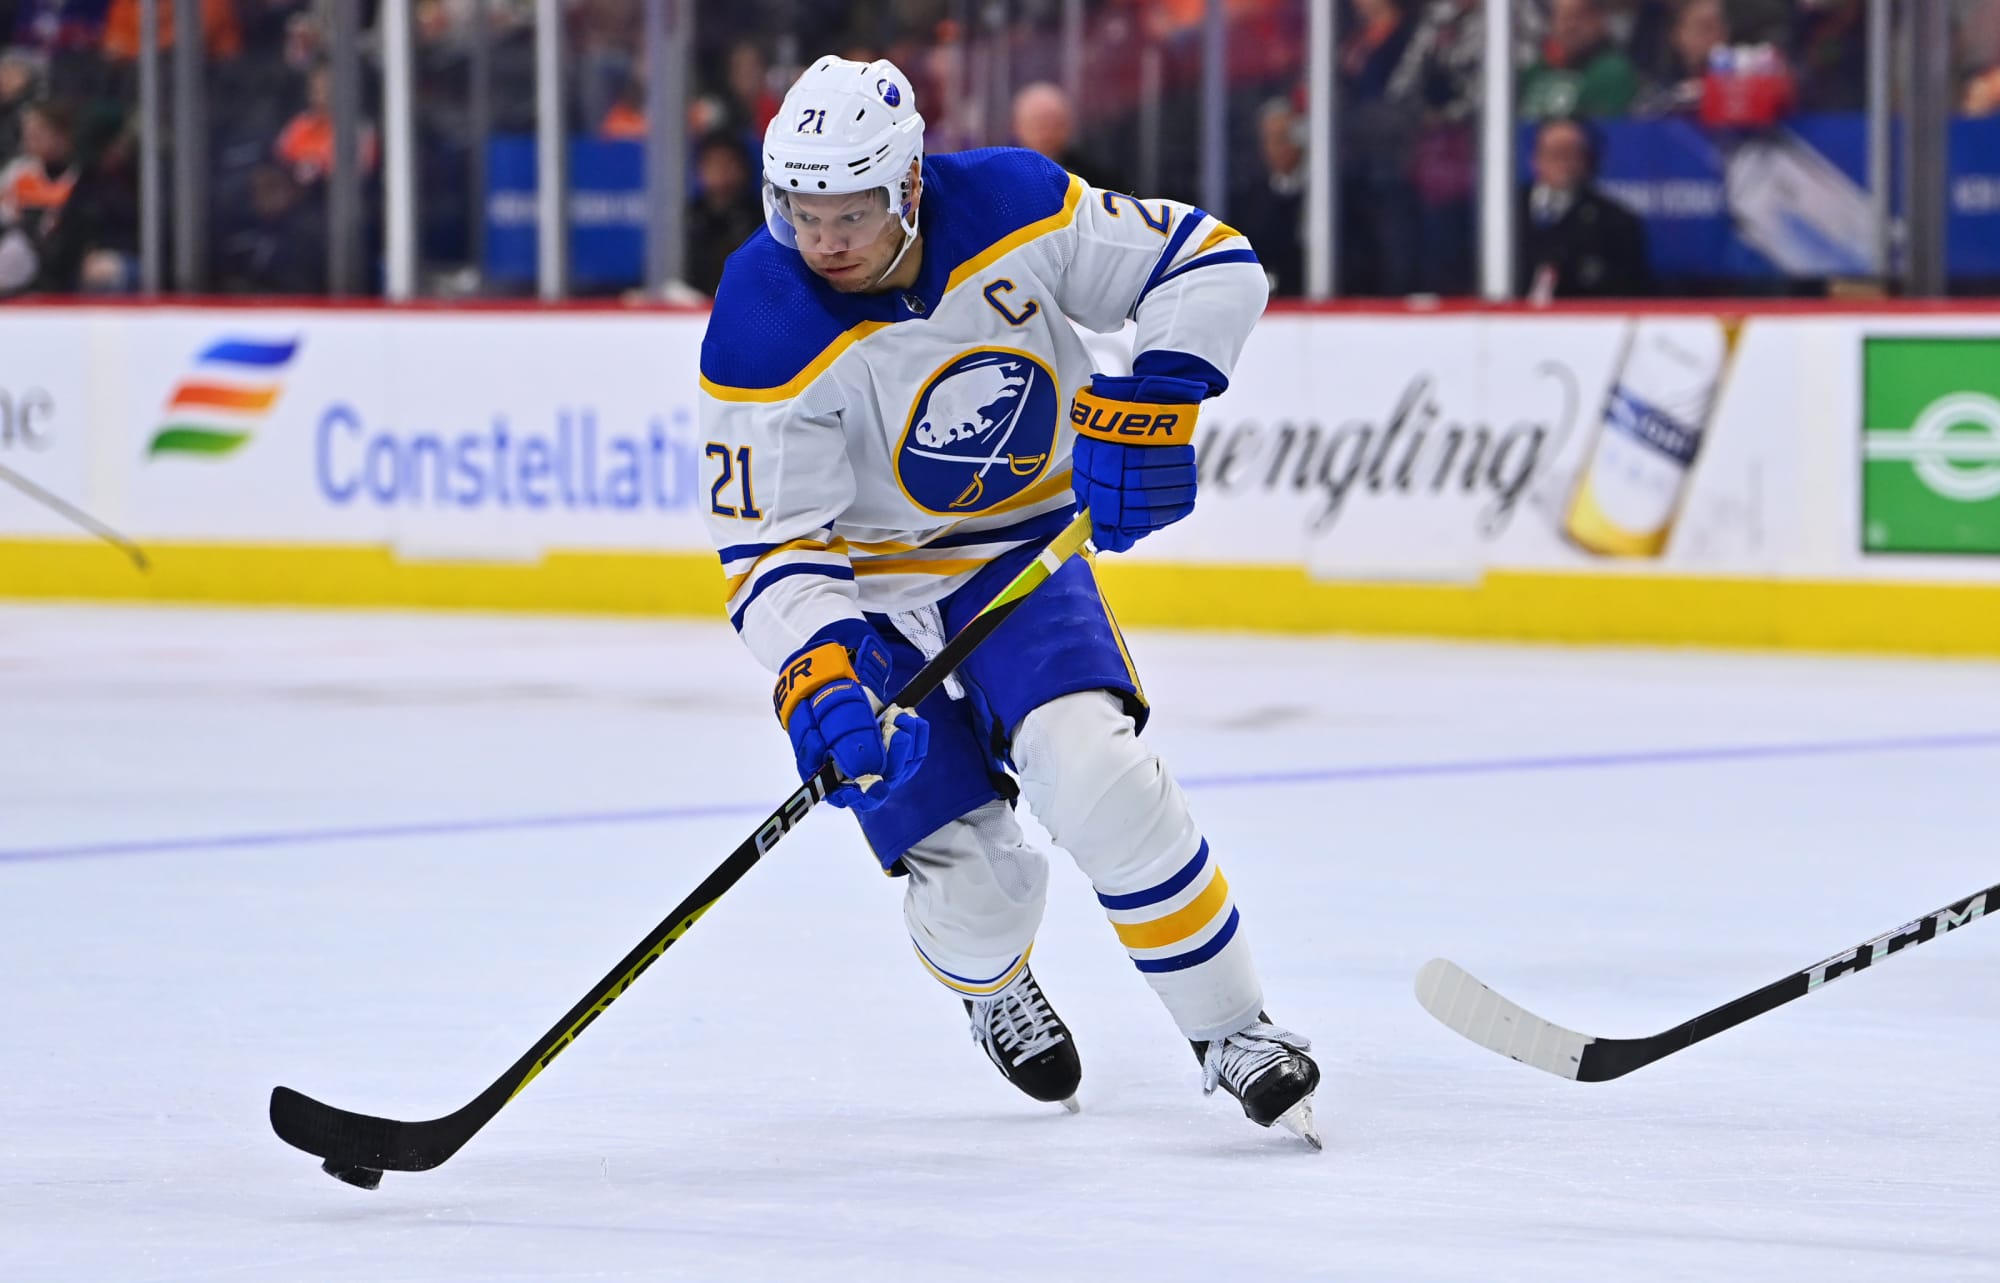 Sabres captain Kyle Okposo 'proud' of his role in turnaround